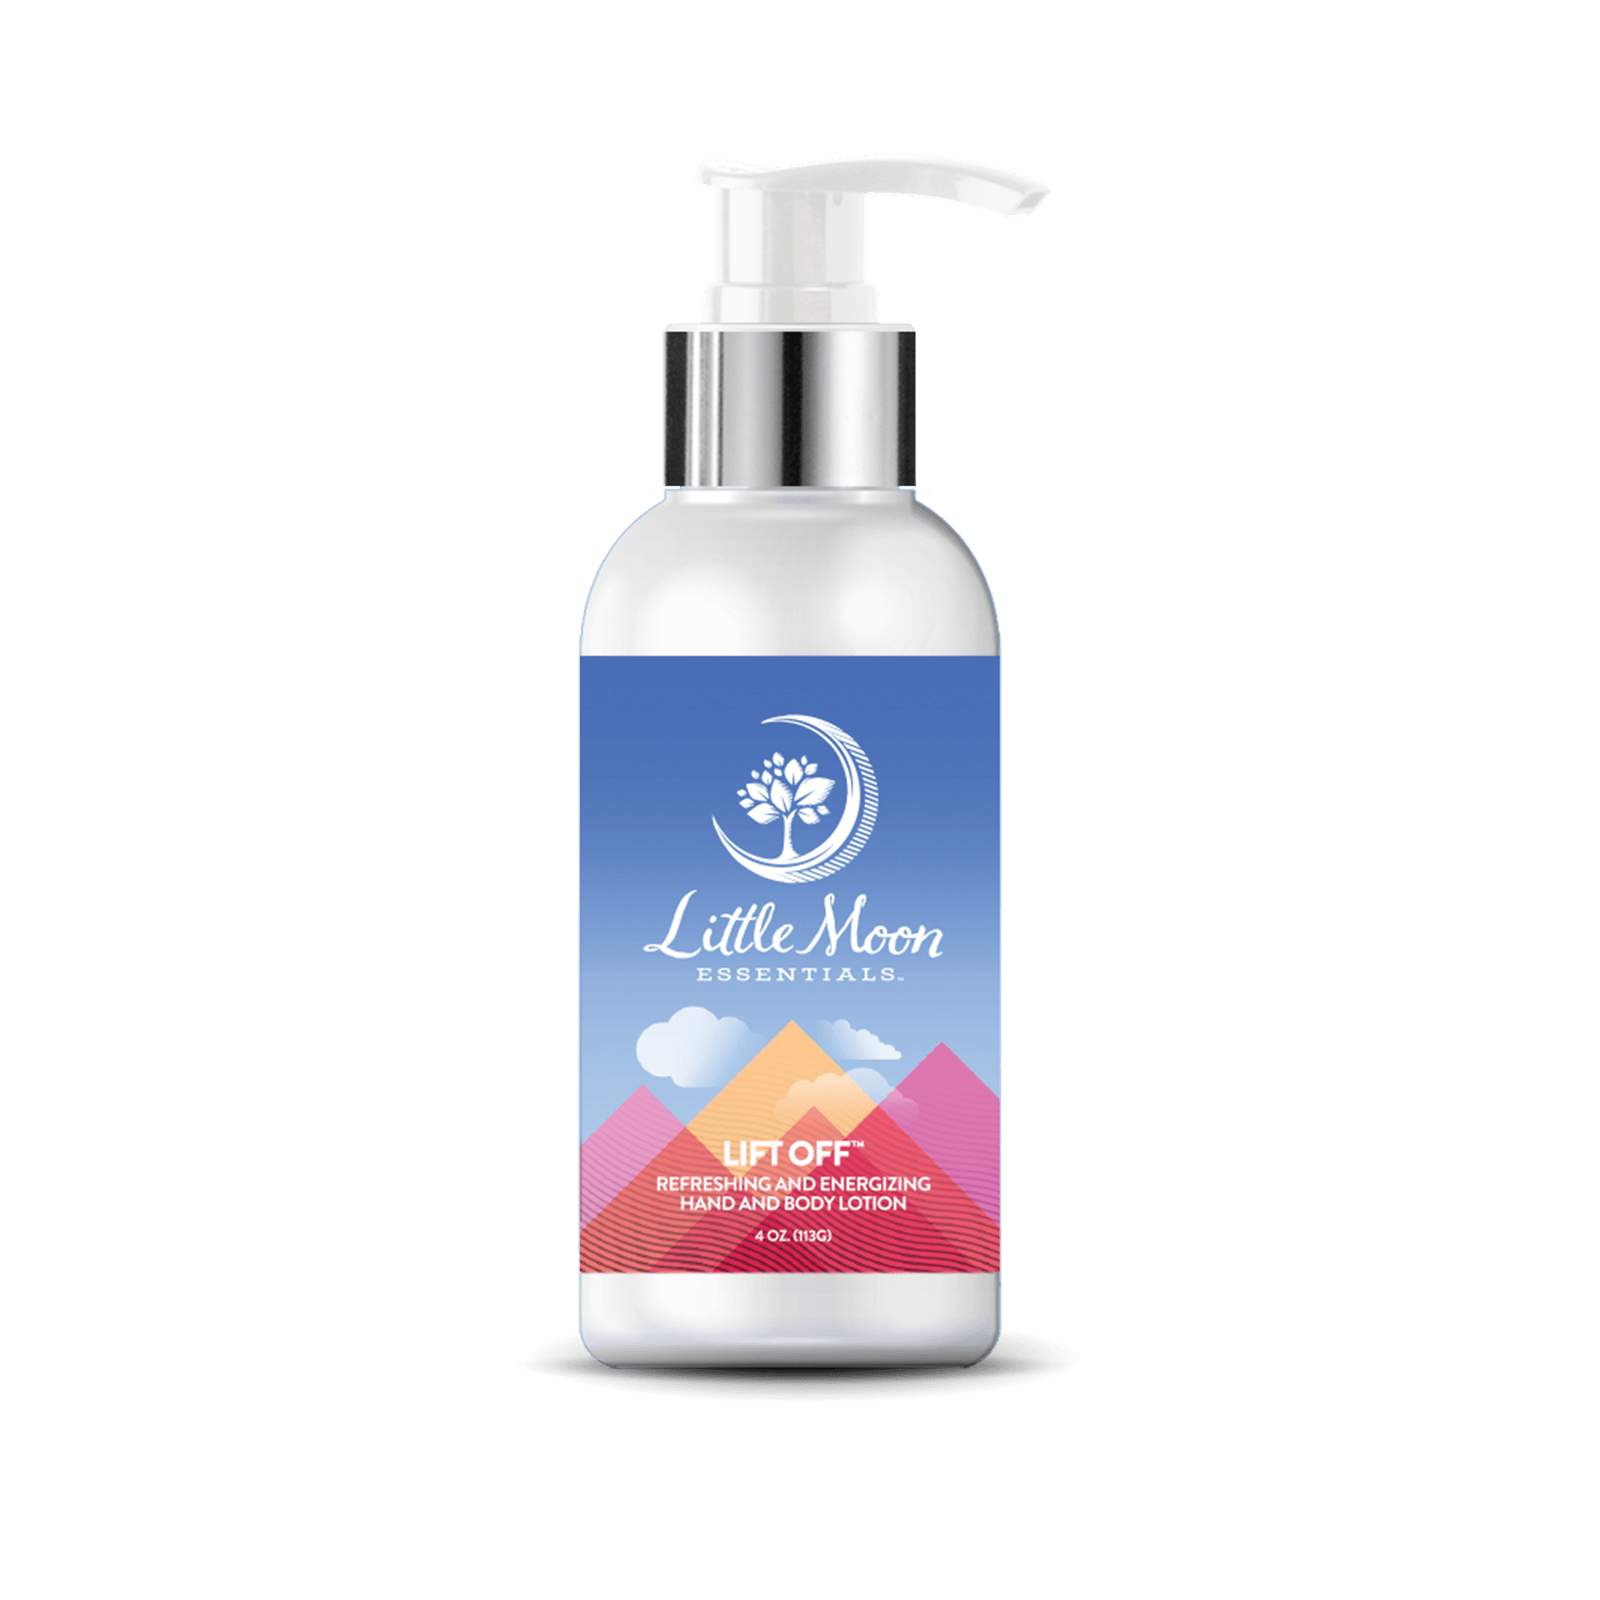 Lift-Off™ Lotion - Little Moon Essentials